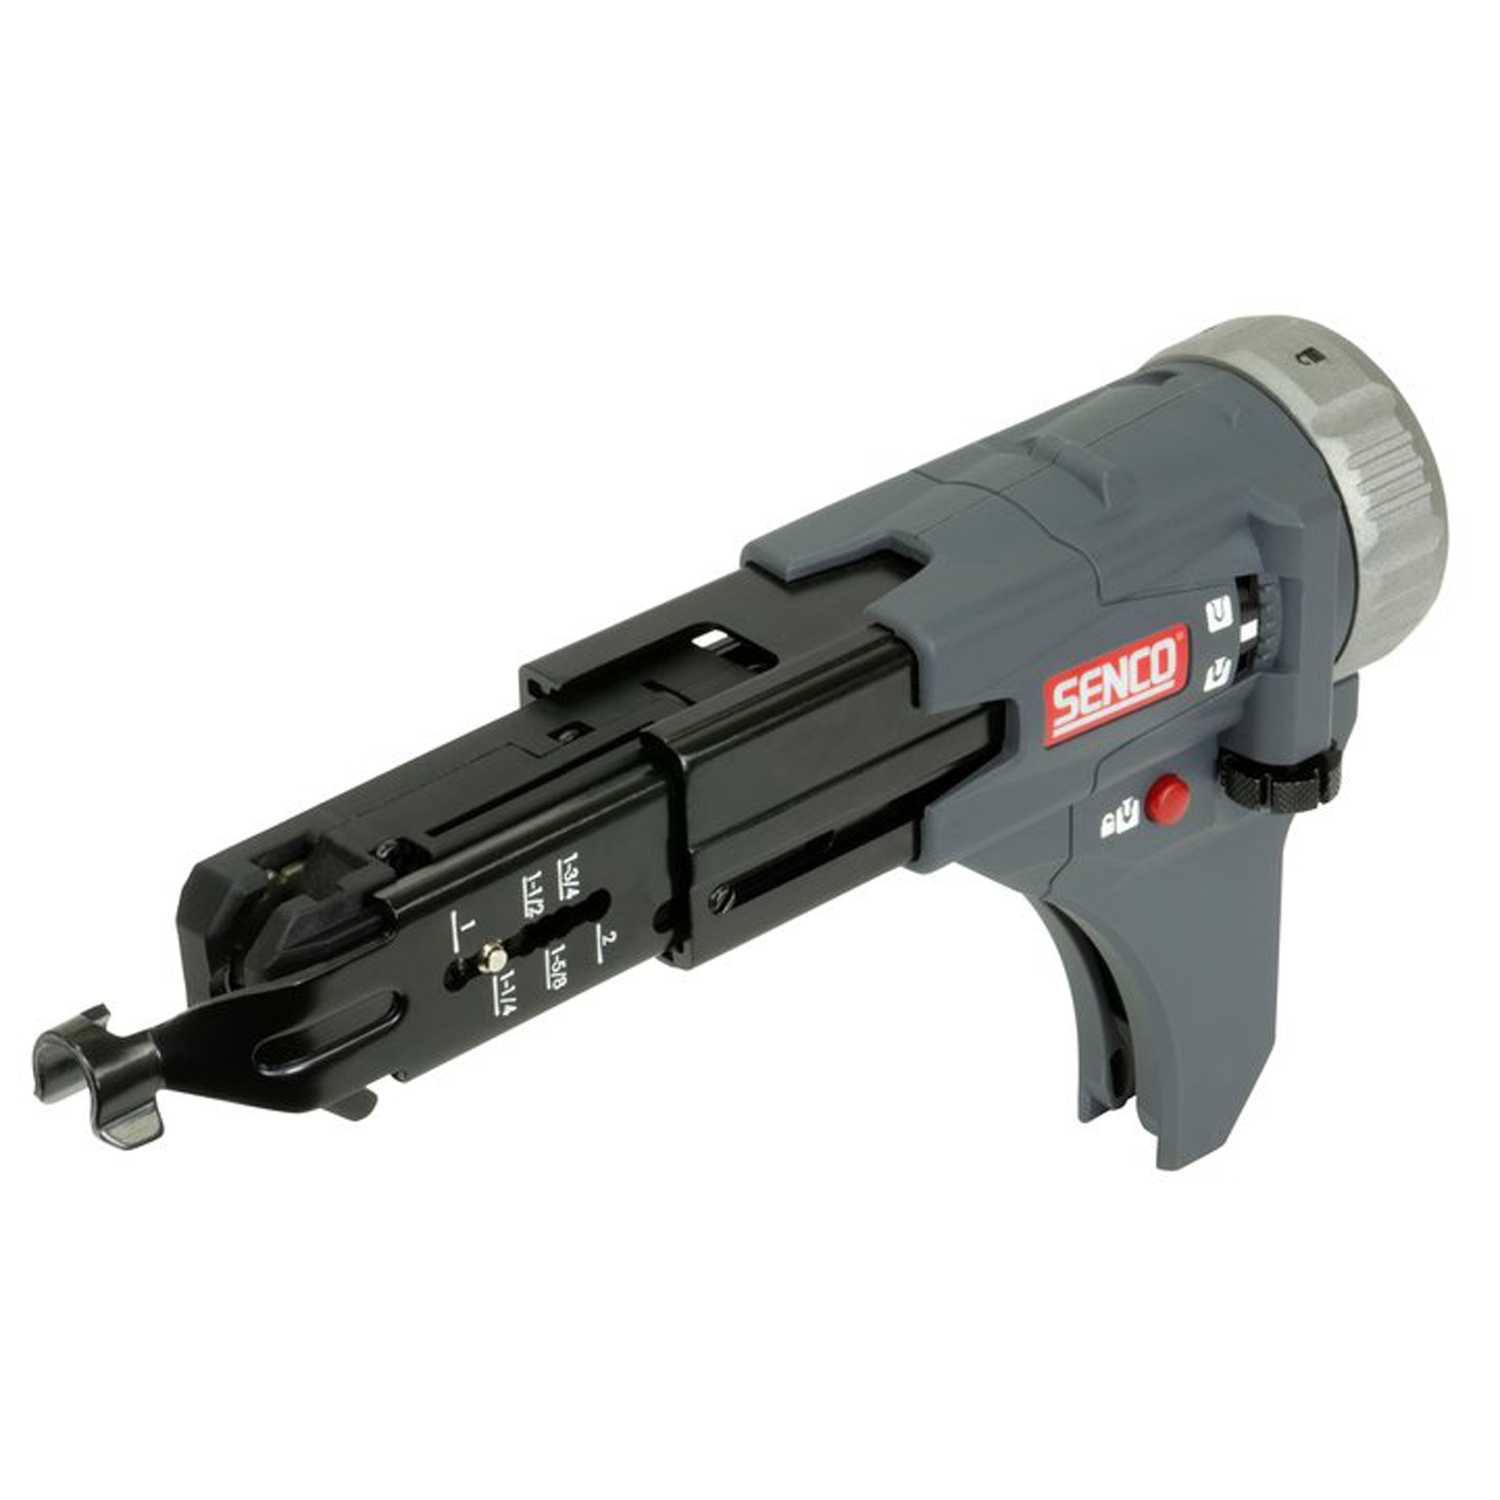 Specialty Power Tool Accessories